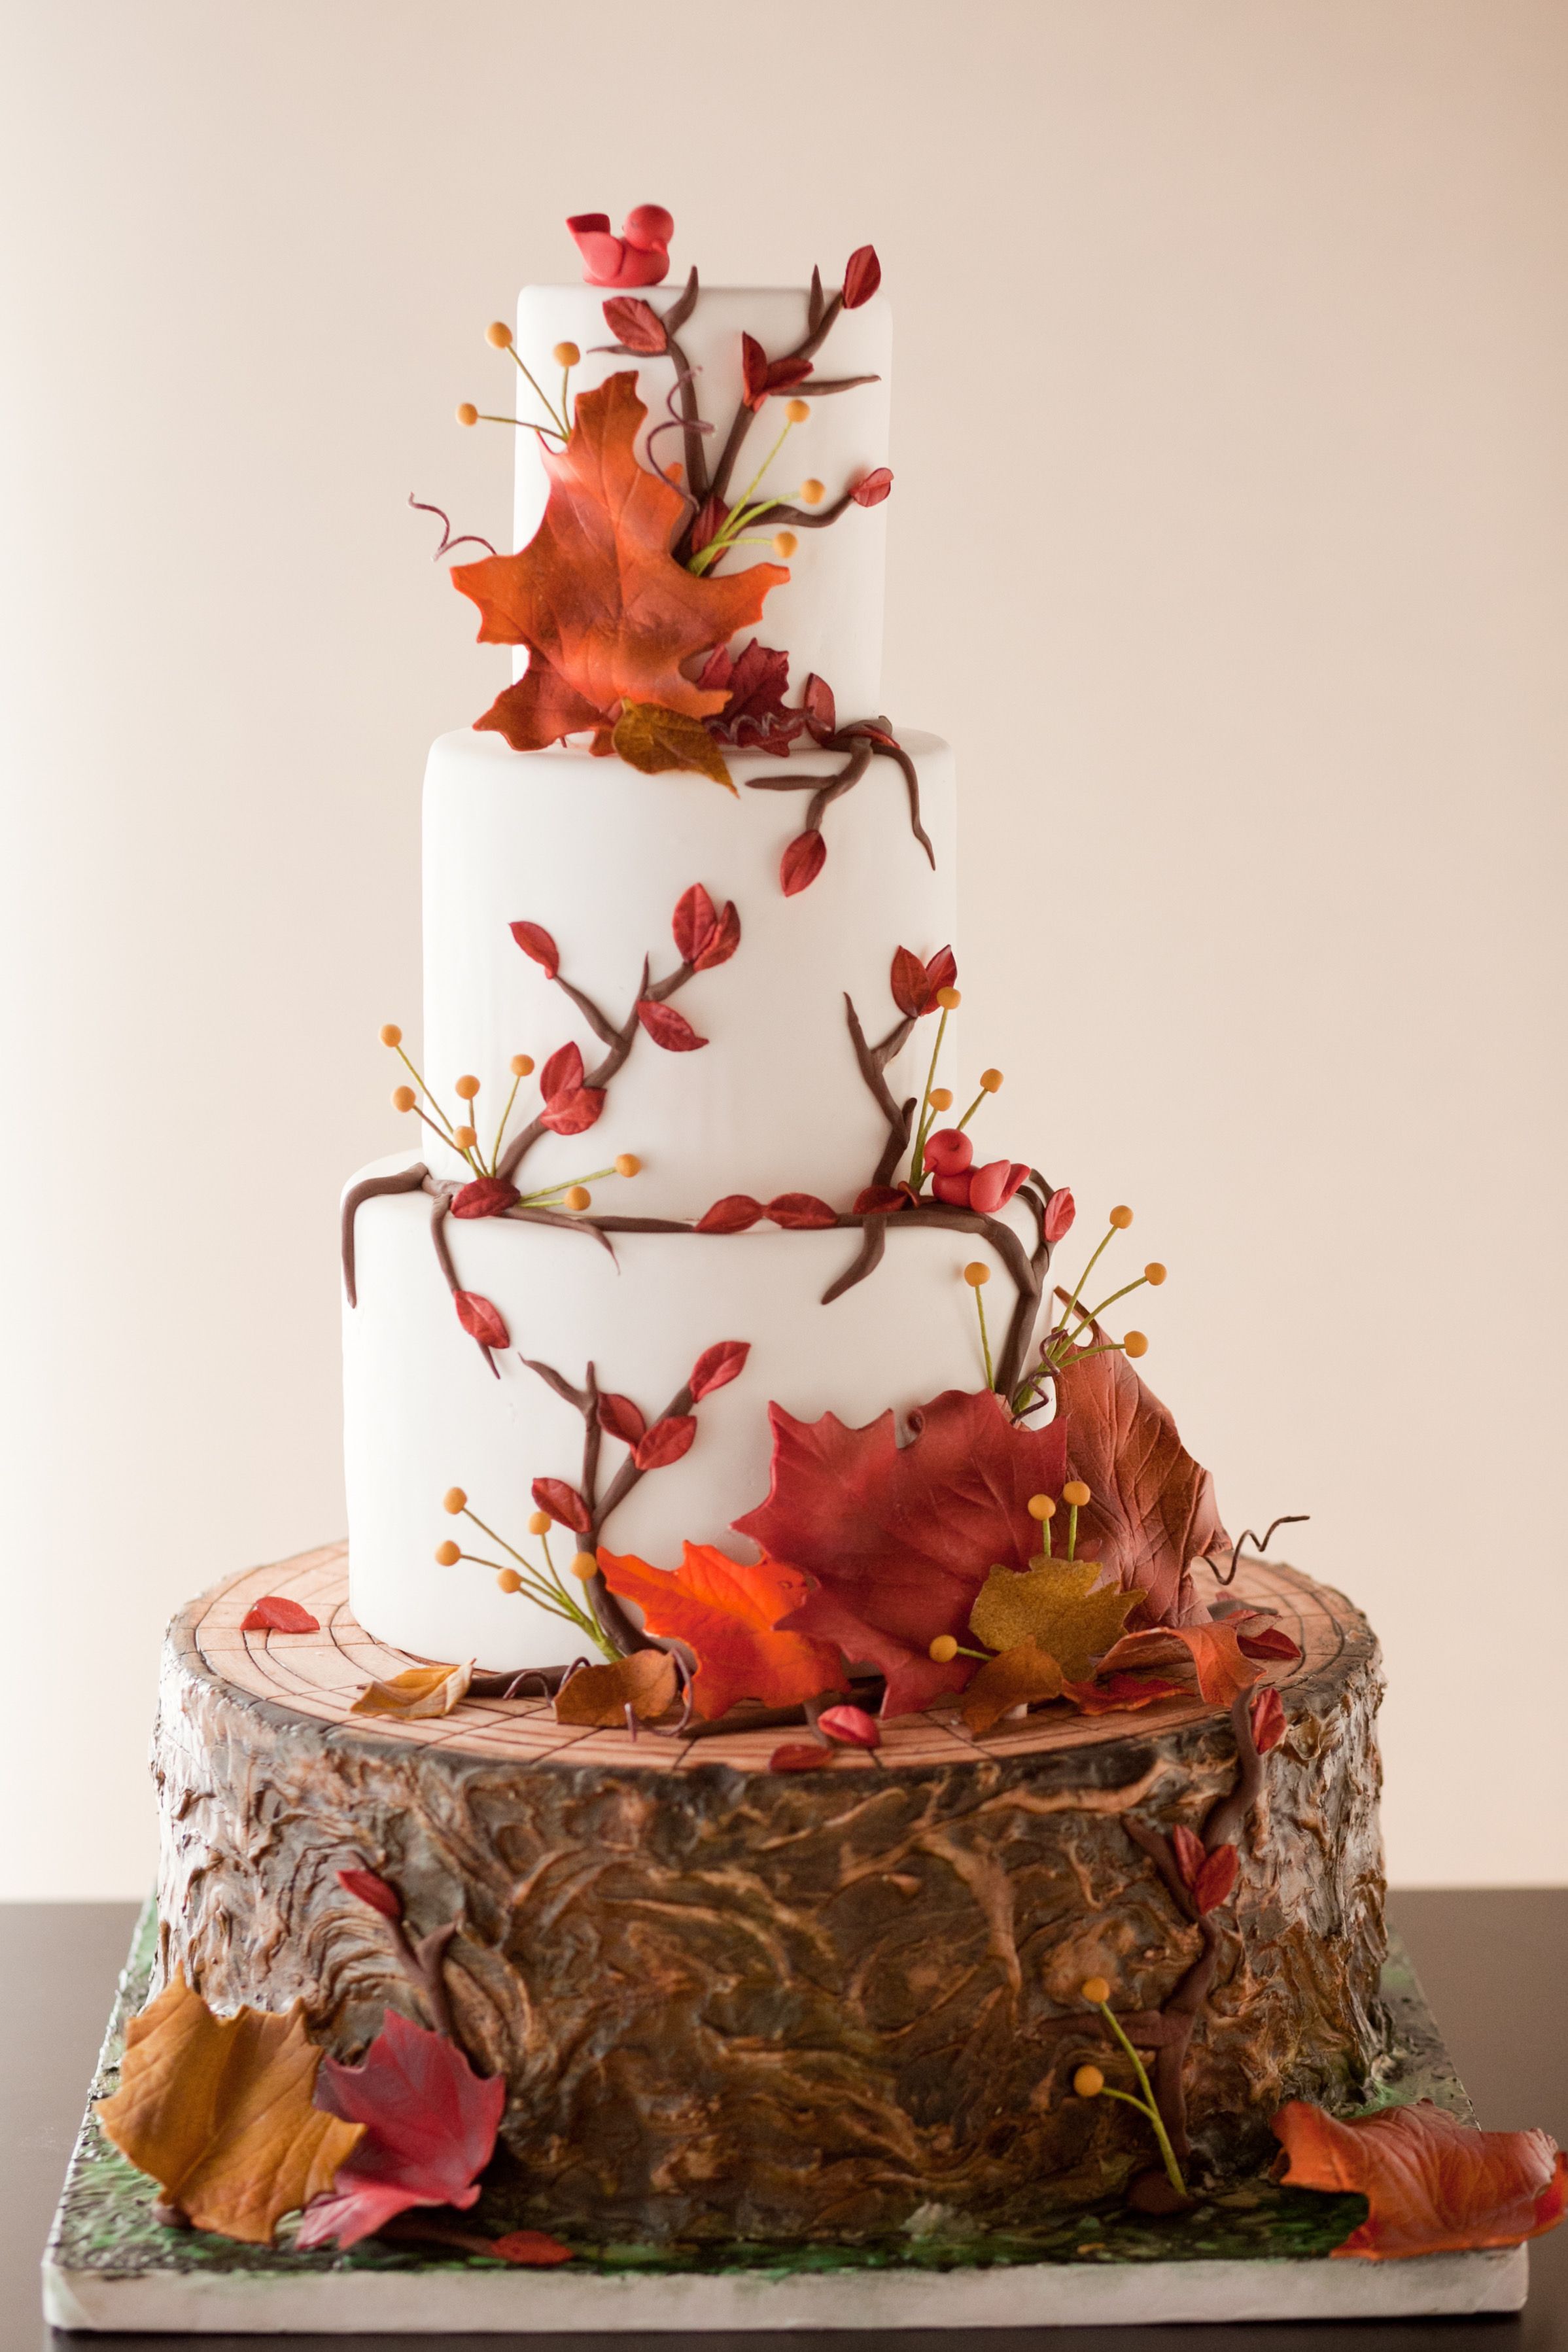 49 Cute Cake Ideas For Your Next Celebration : Autumn blooms